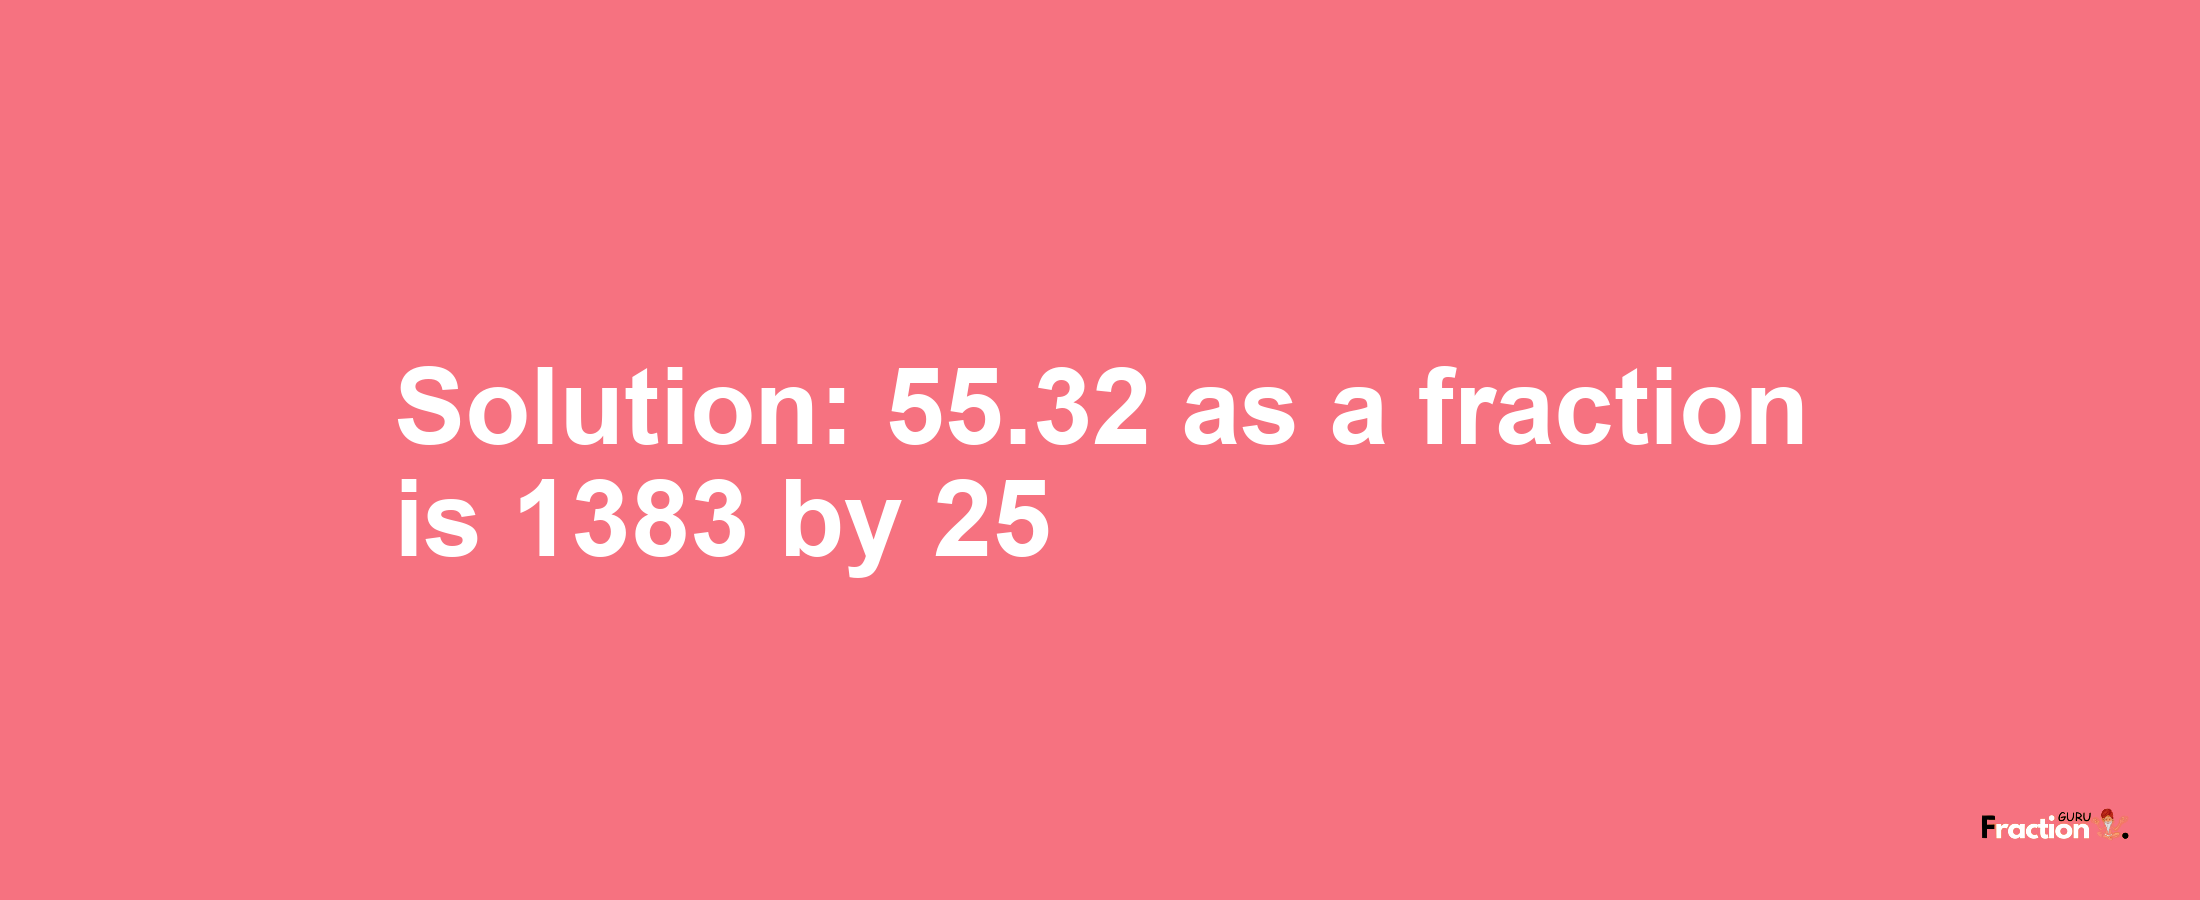 Solution:55.32 as a fraction is 1383/25